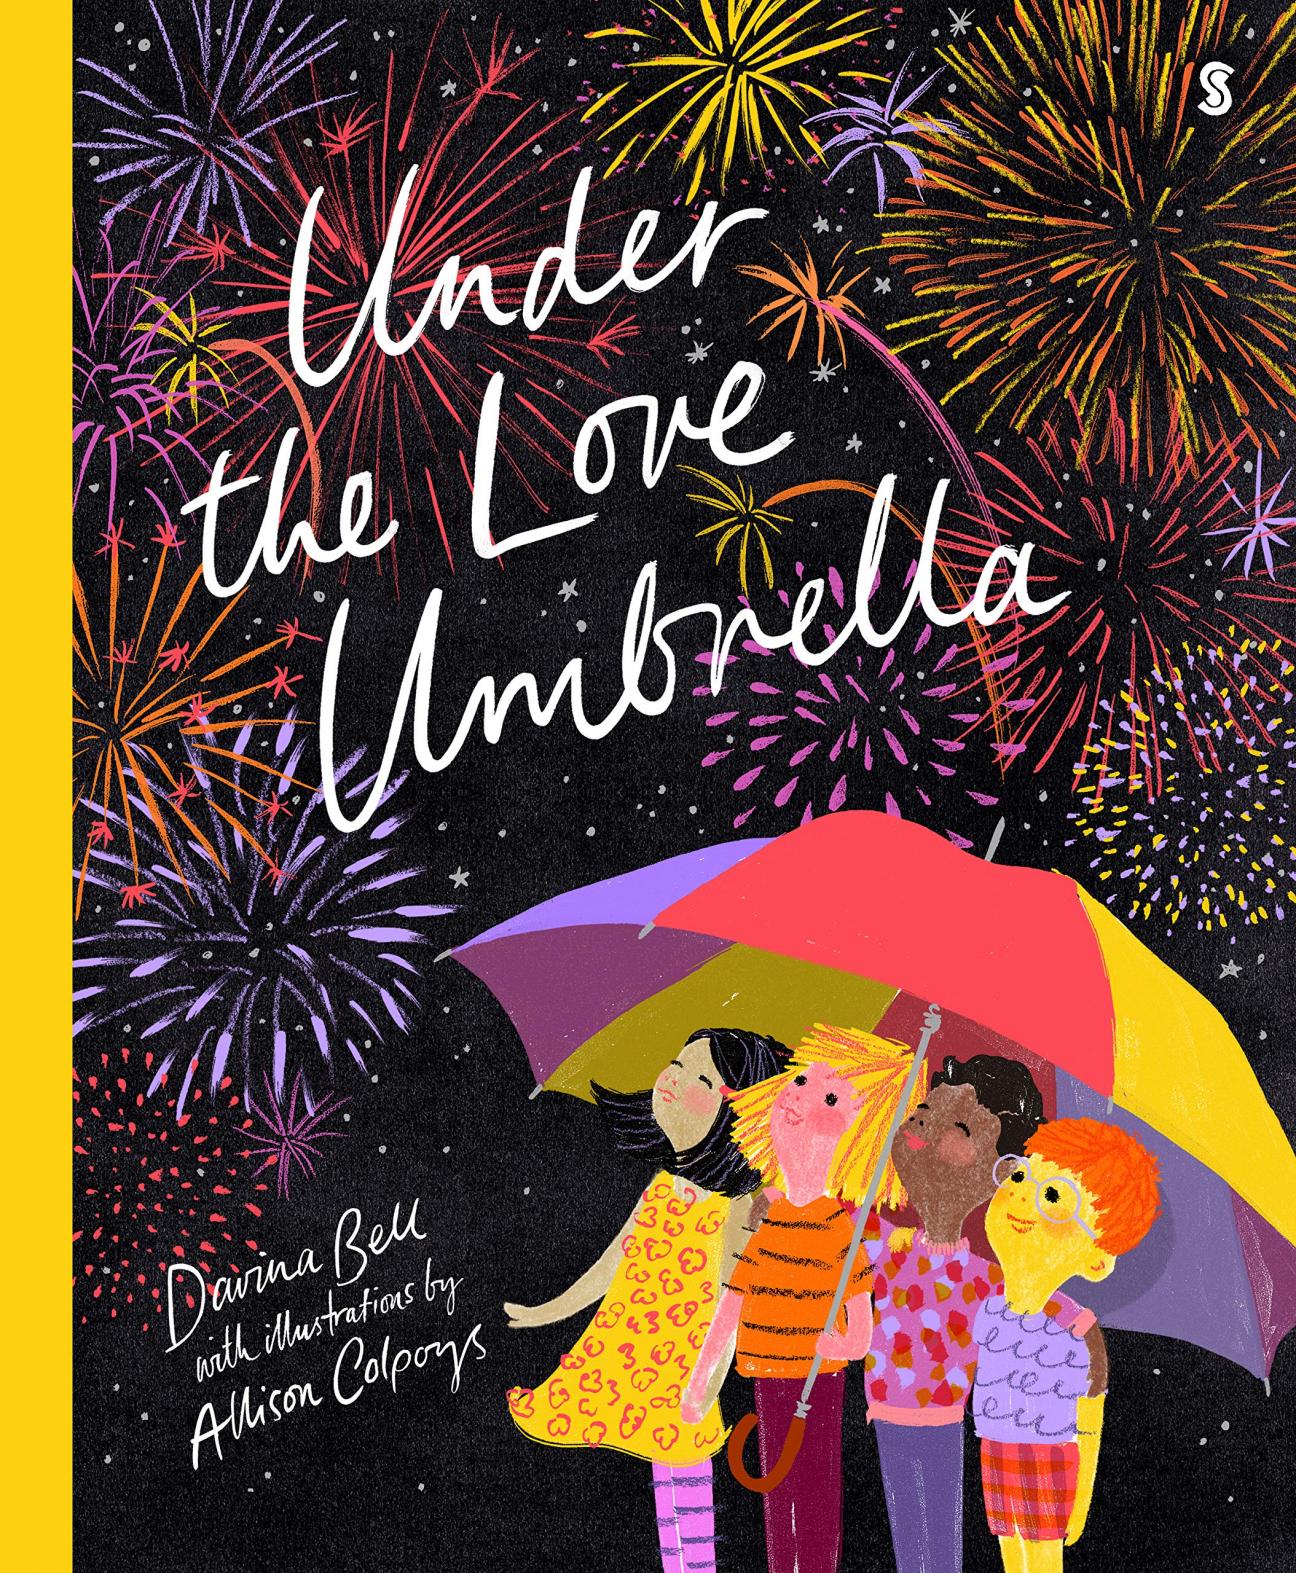 The cover of "Under the Love Umbrella" by Davina Bell, which features a drawing of four multicultural children under a large umbrella, looking up at a dark sky filled with fireworks.